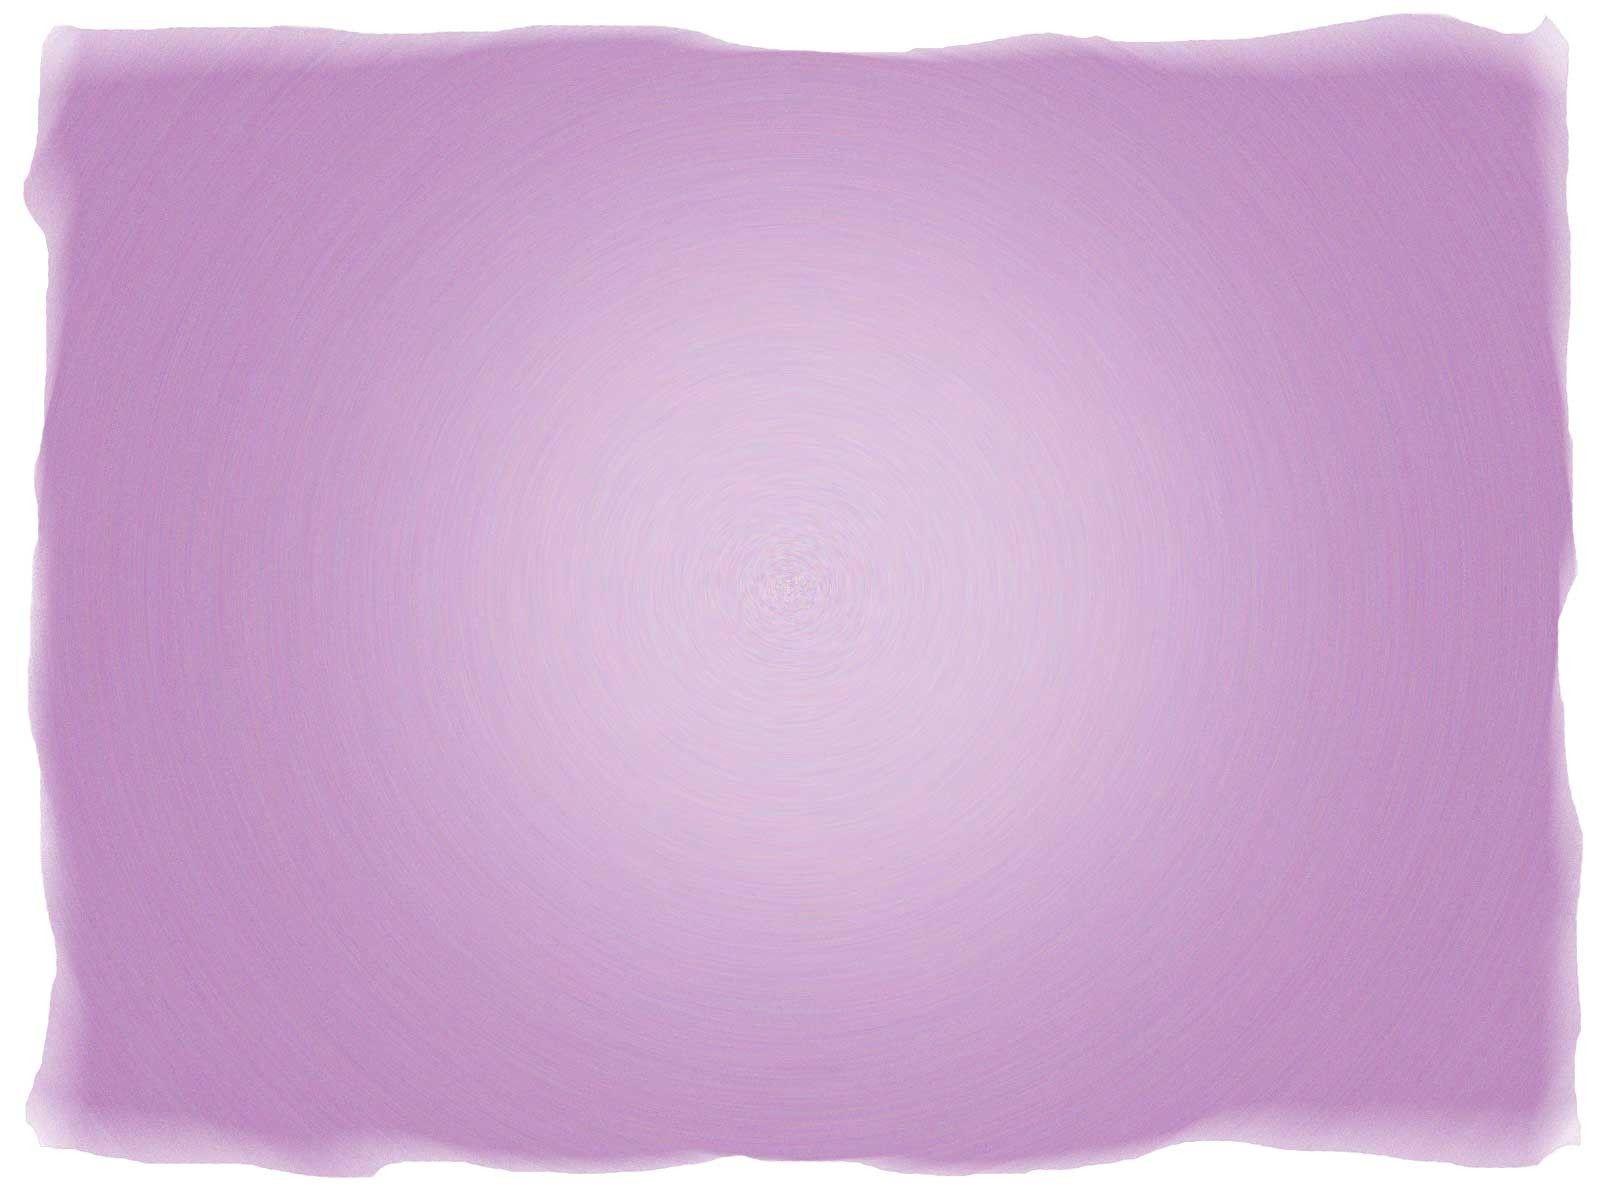 Purple Backgrounds Wallpapers - Wallpaper Cave